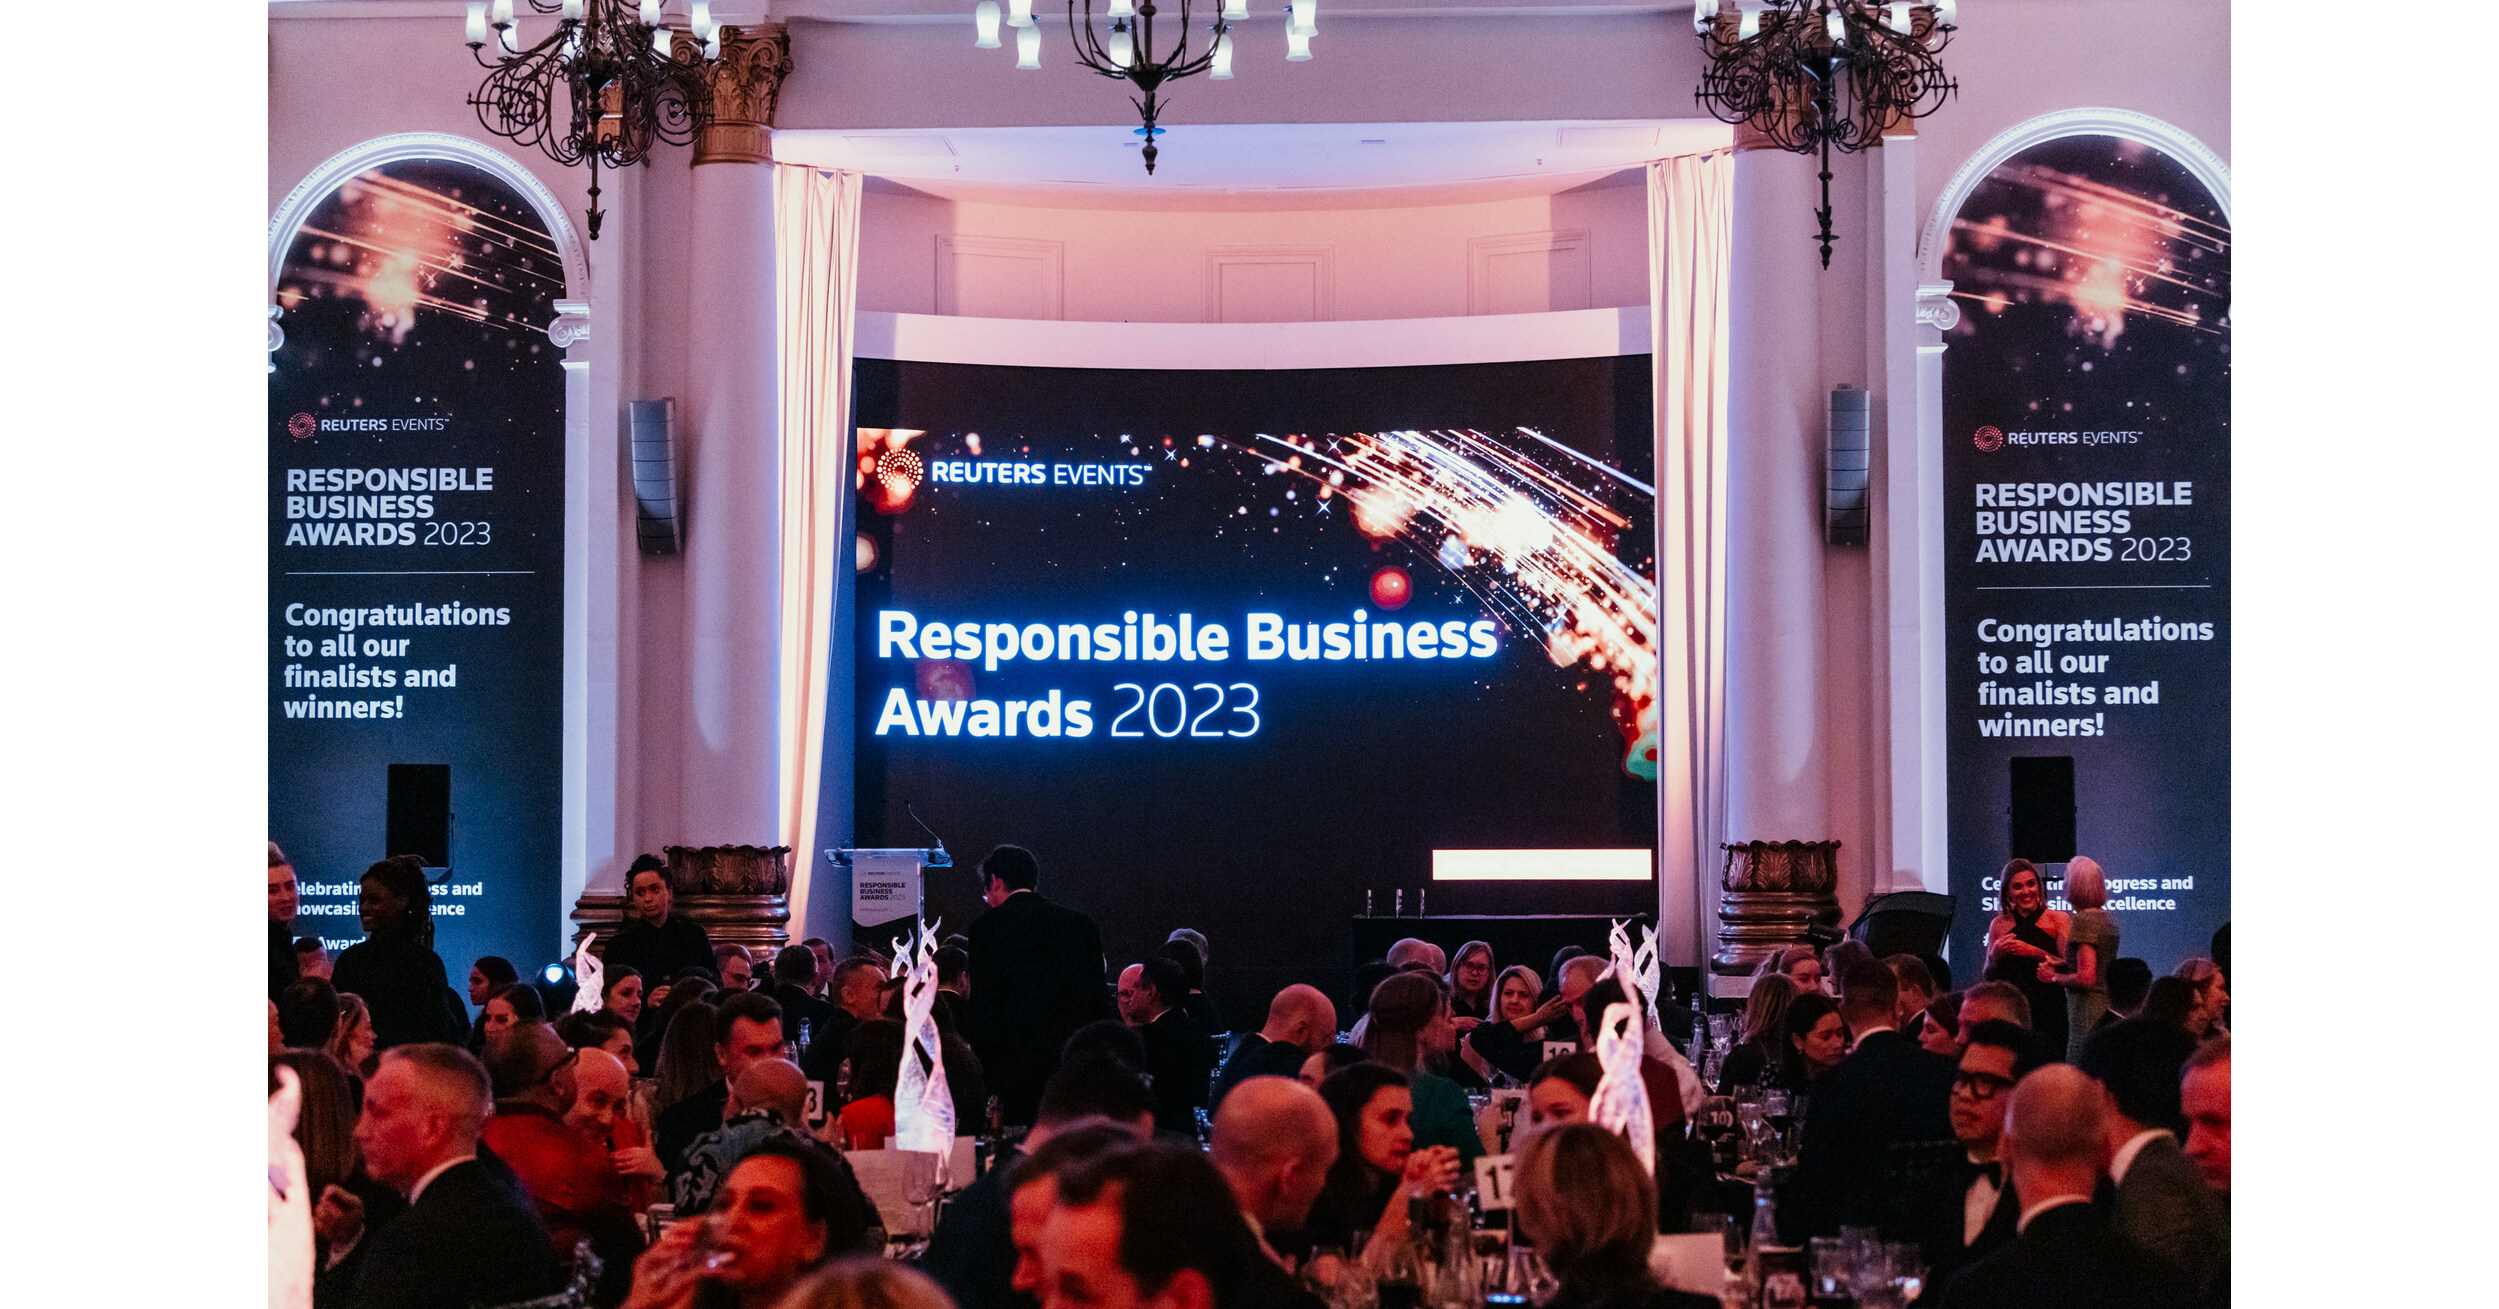 Reuters Events announces winners of the 14th Responsible Business